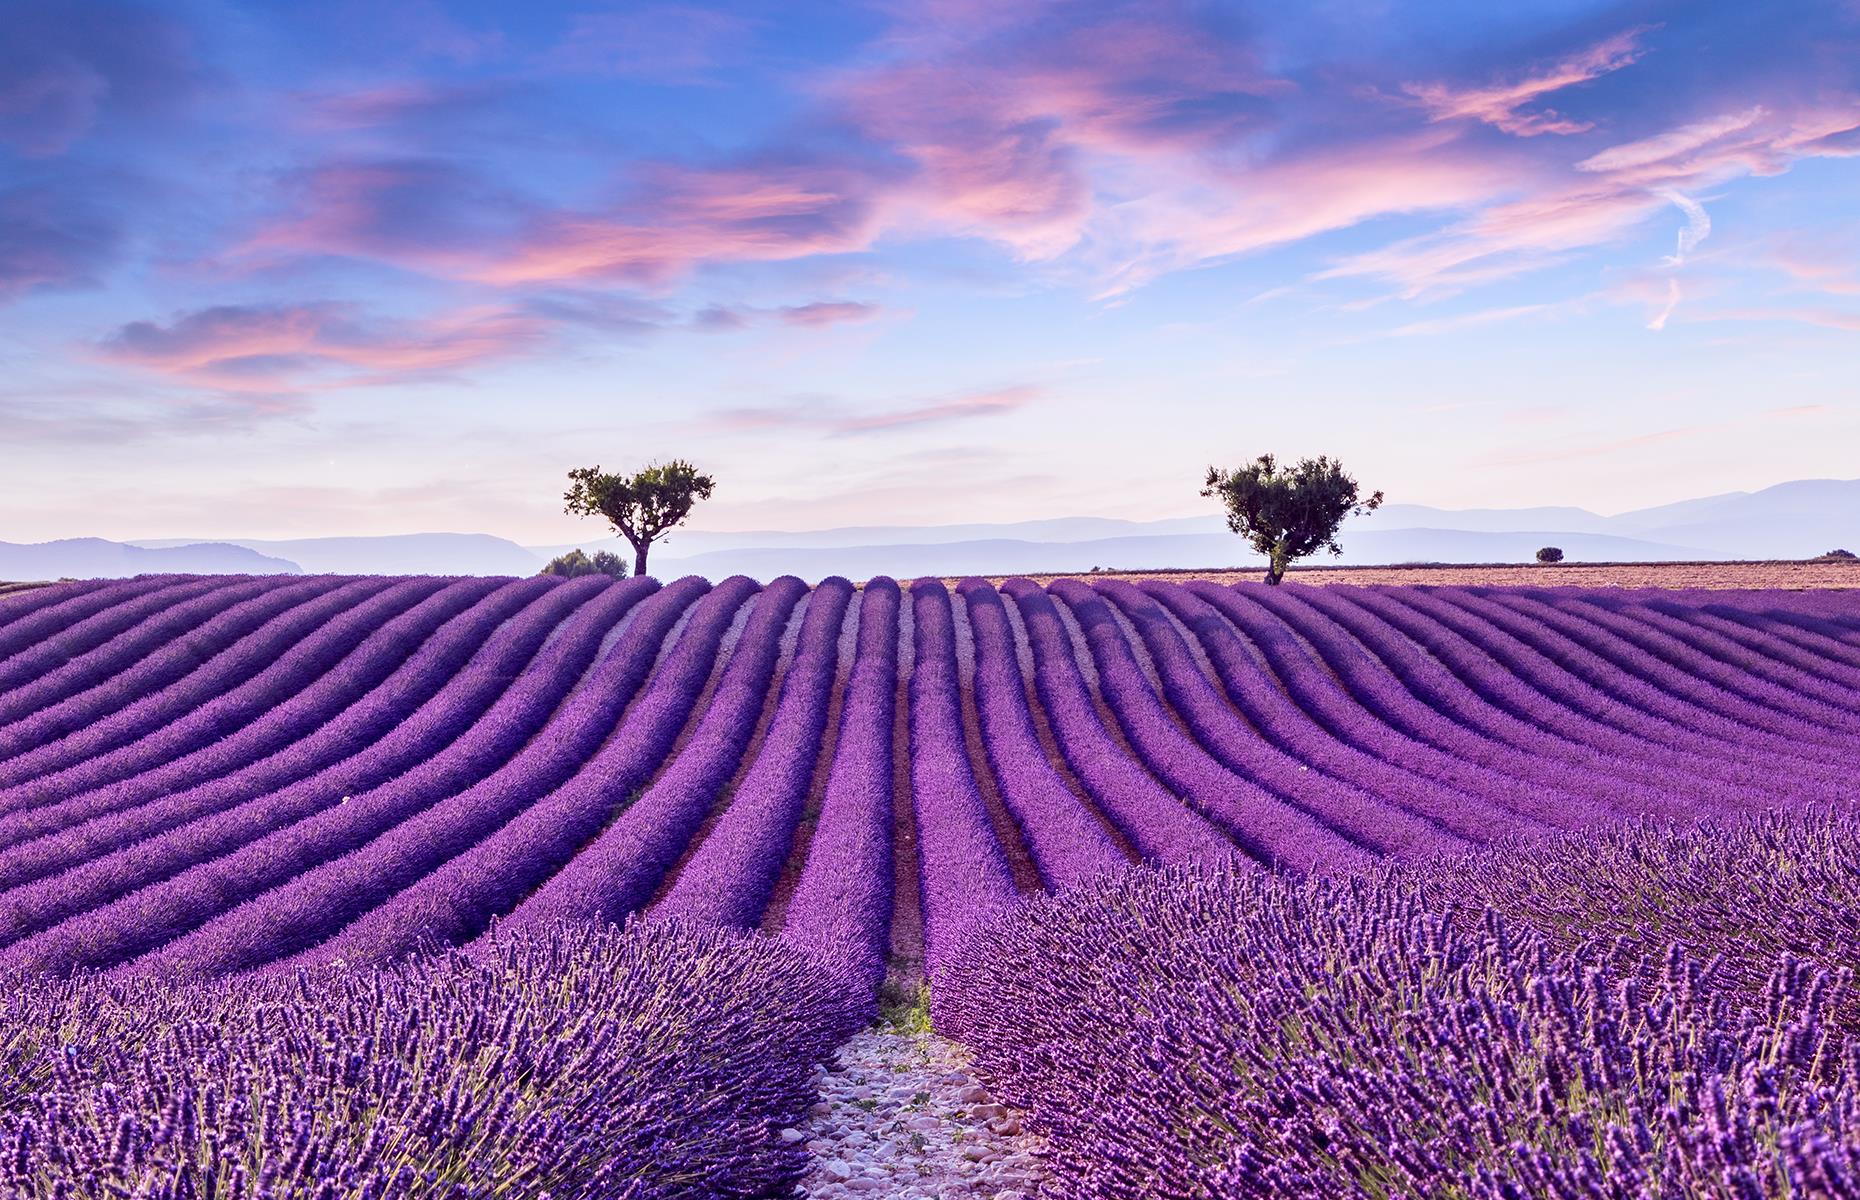 The lavender fields of France's Provence region explode in a fragrant haze of purple from around mid-June up until August (though they're at their peak in early July). The most concentration of lavender fields is on the high plateau around Sault, at the foot of the Mont Ventoux and around Apt and Gordes. Lavender is an important part of life in Provence as it has countless uses, from beauty products and soaps to aromatherapy, as a natural remedy and even in cooking.